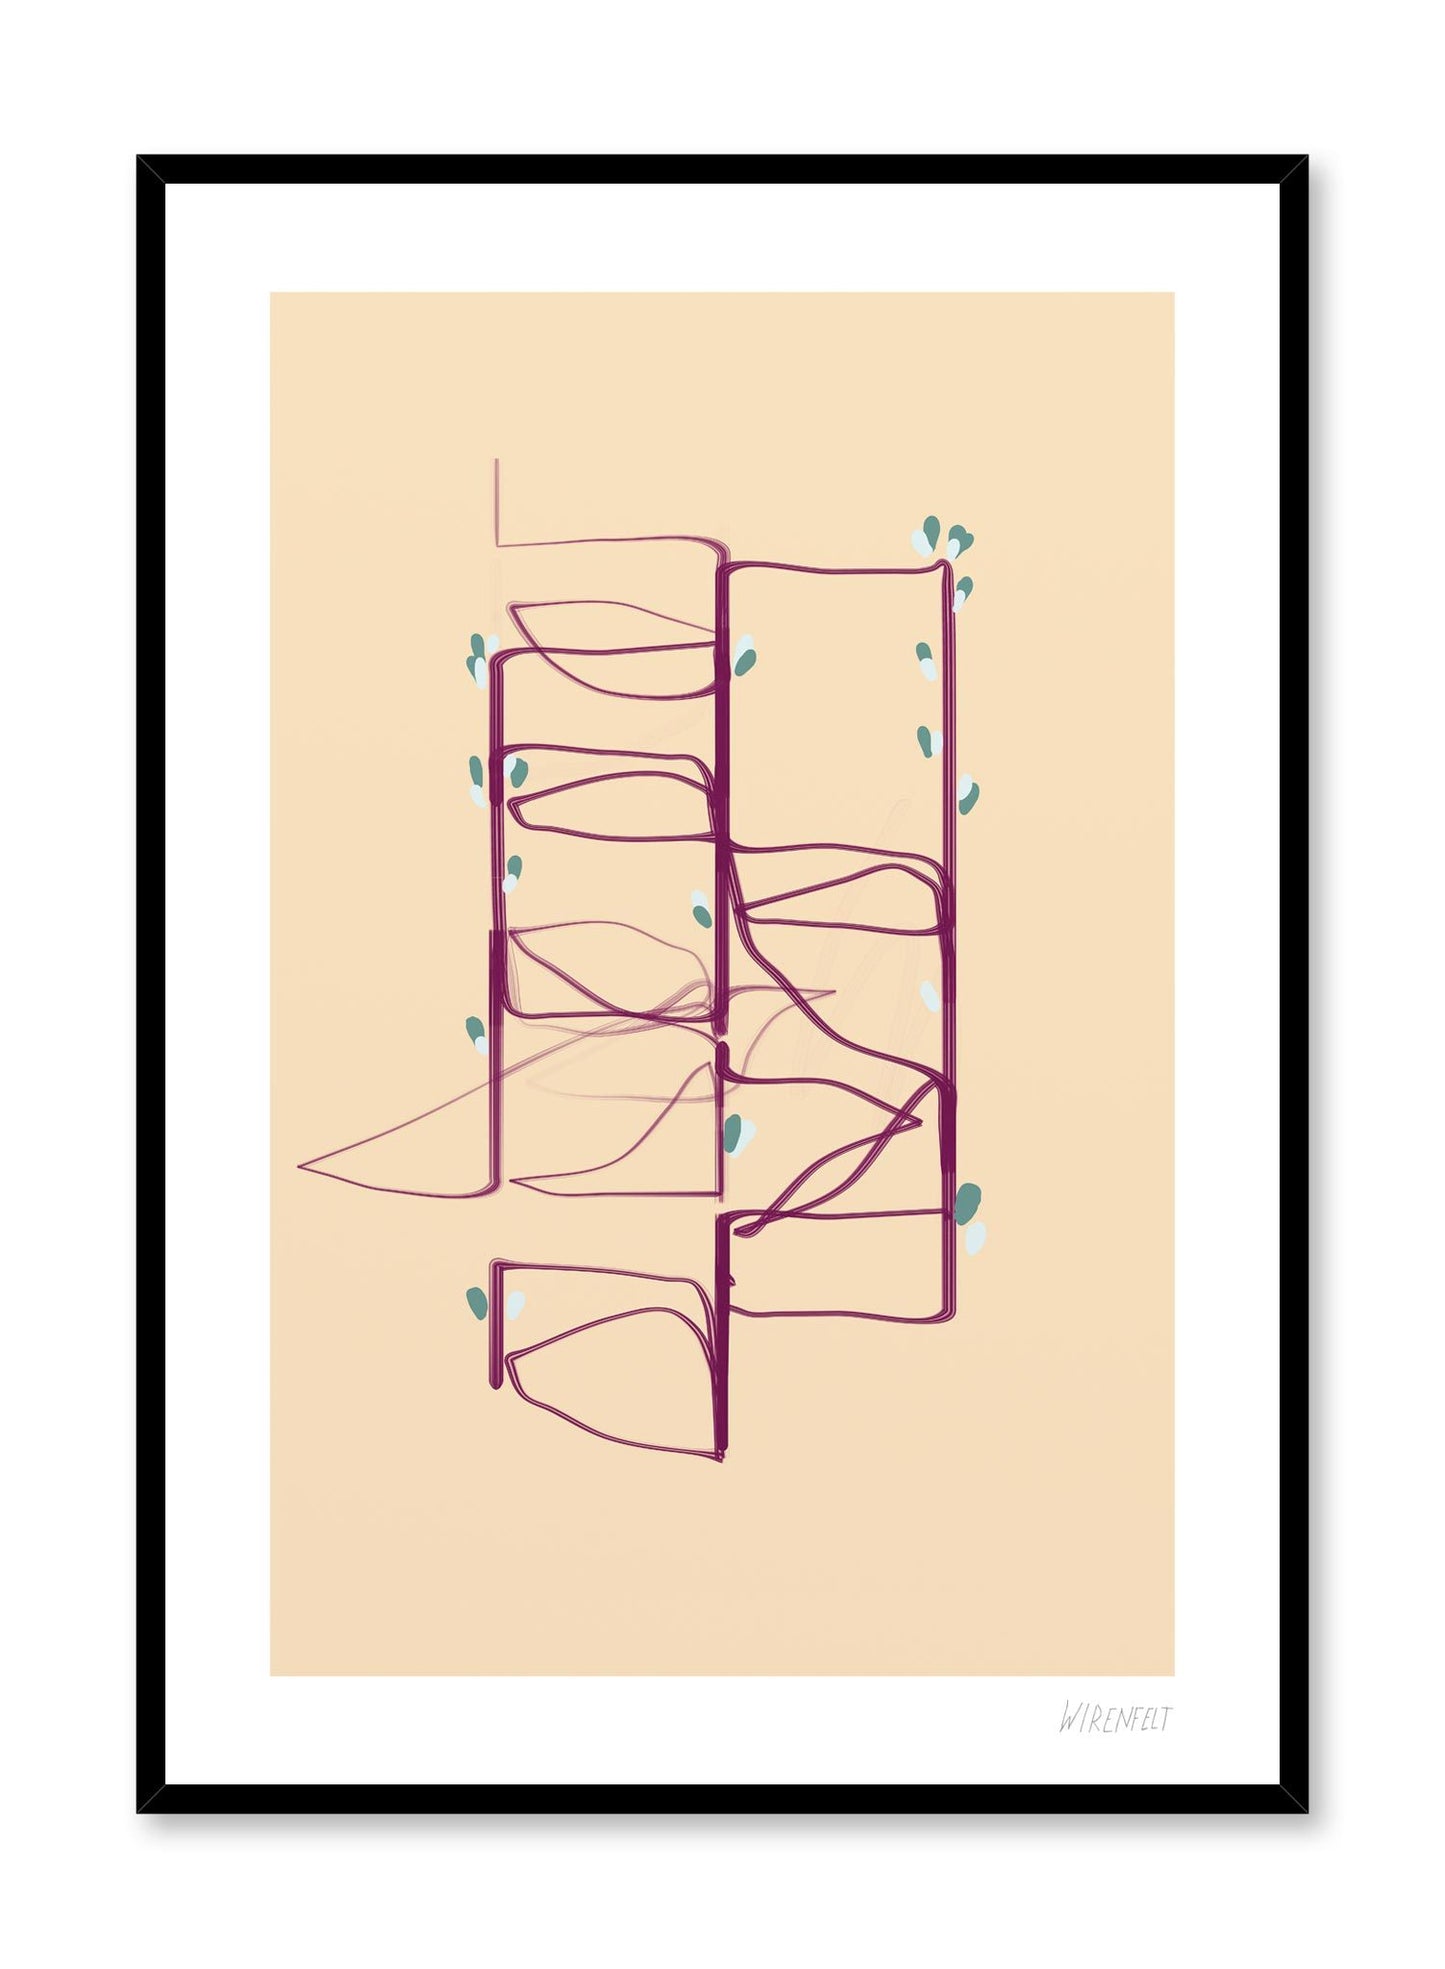 Modern minimalist poster by Opposite Wall with abstract paint design of maze from above